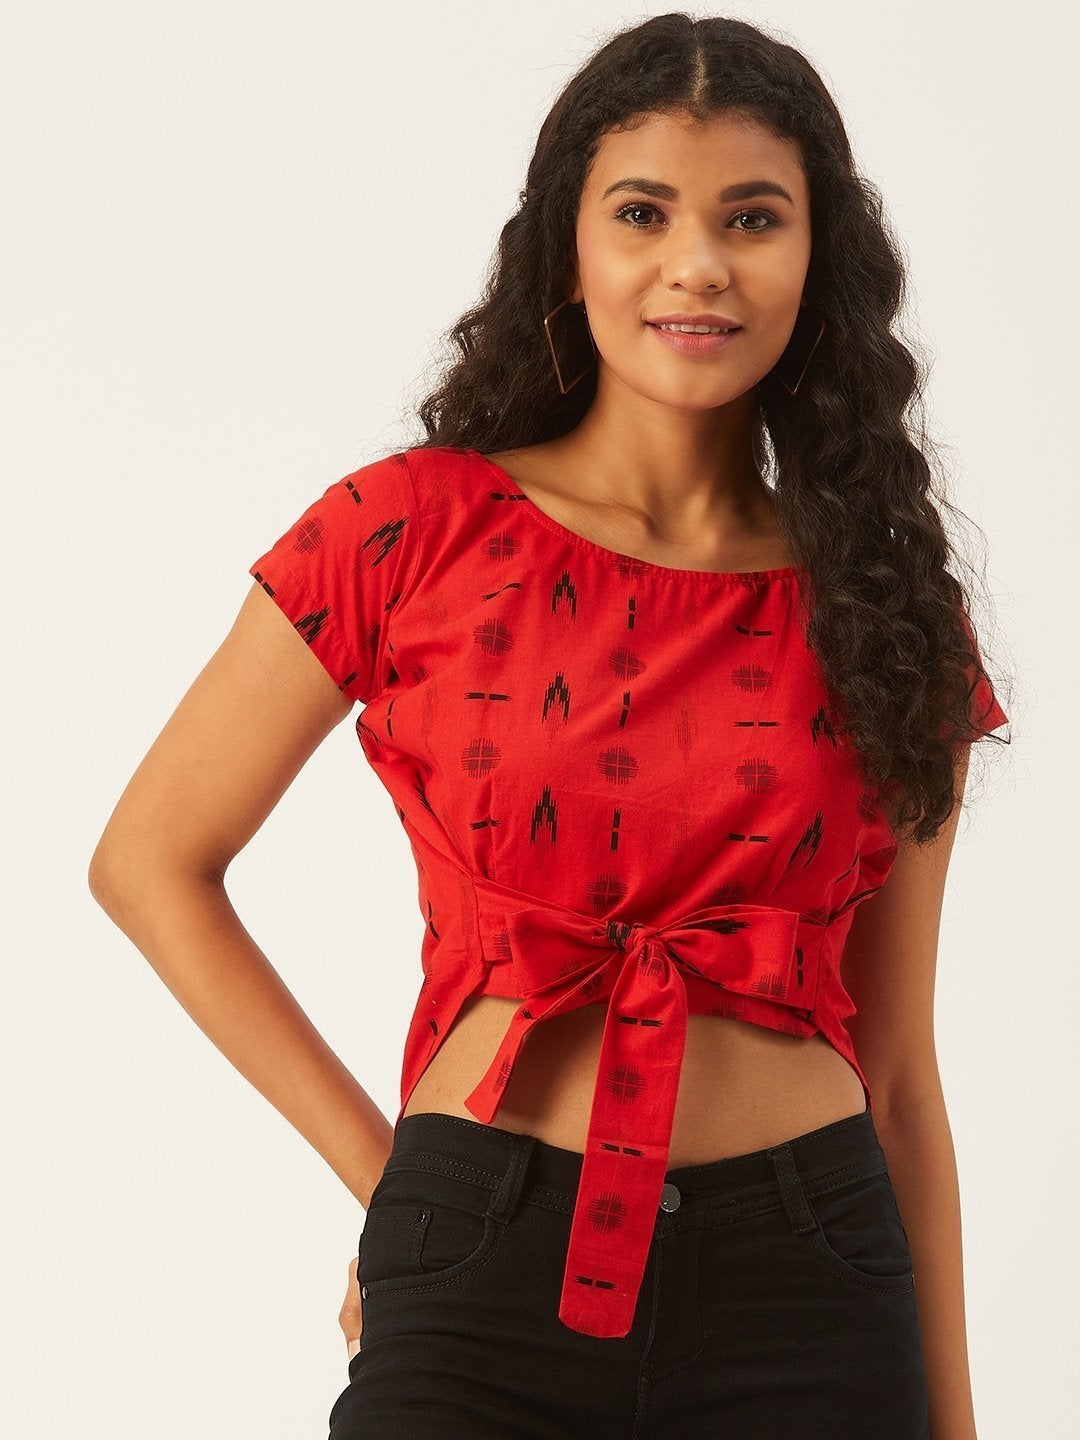 Women's Red Top With Shapes - InWeave